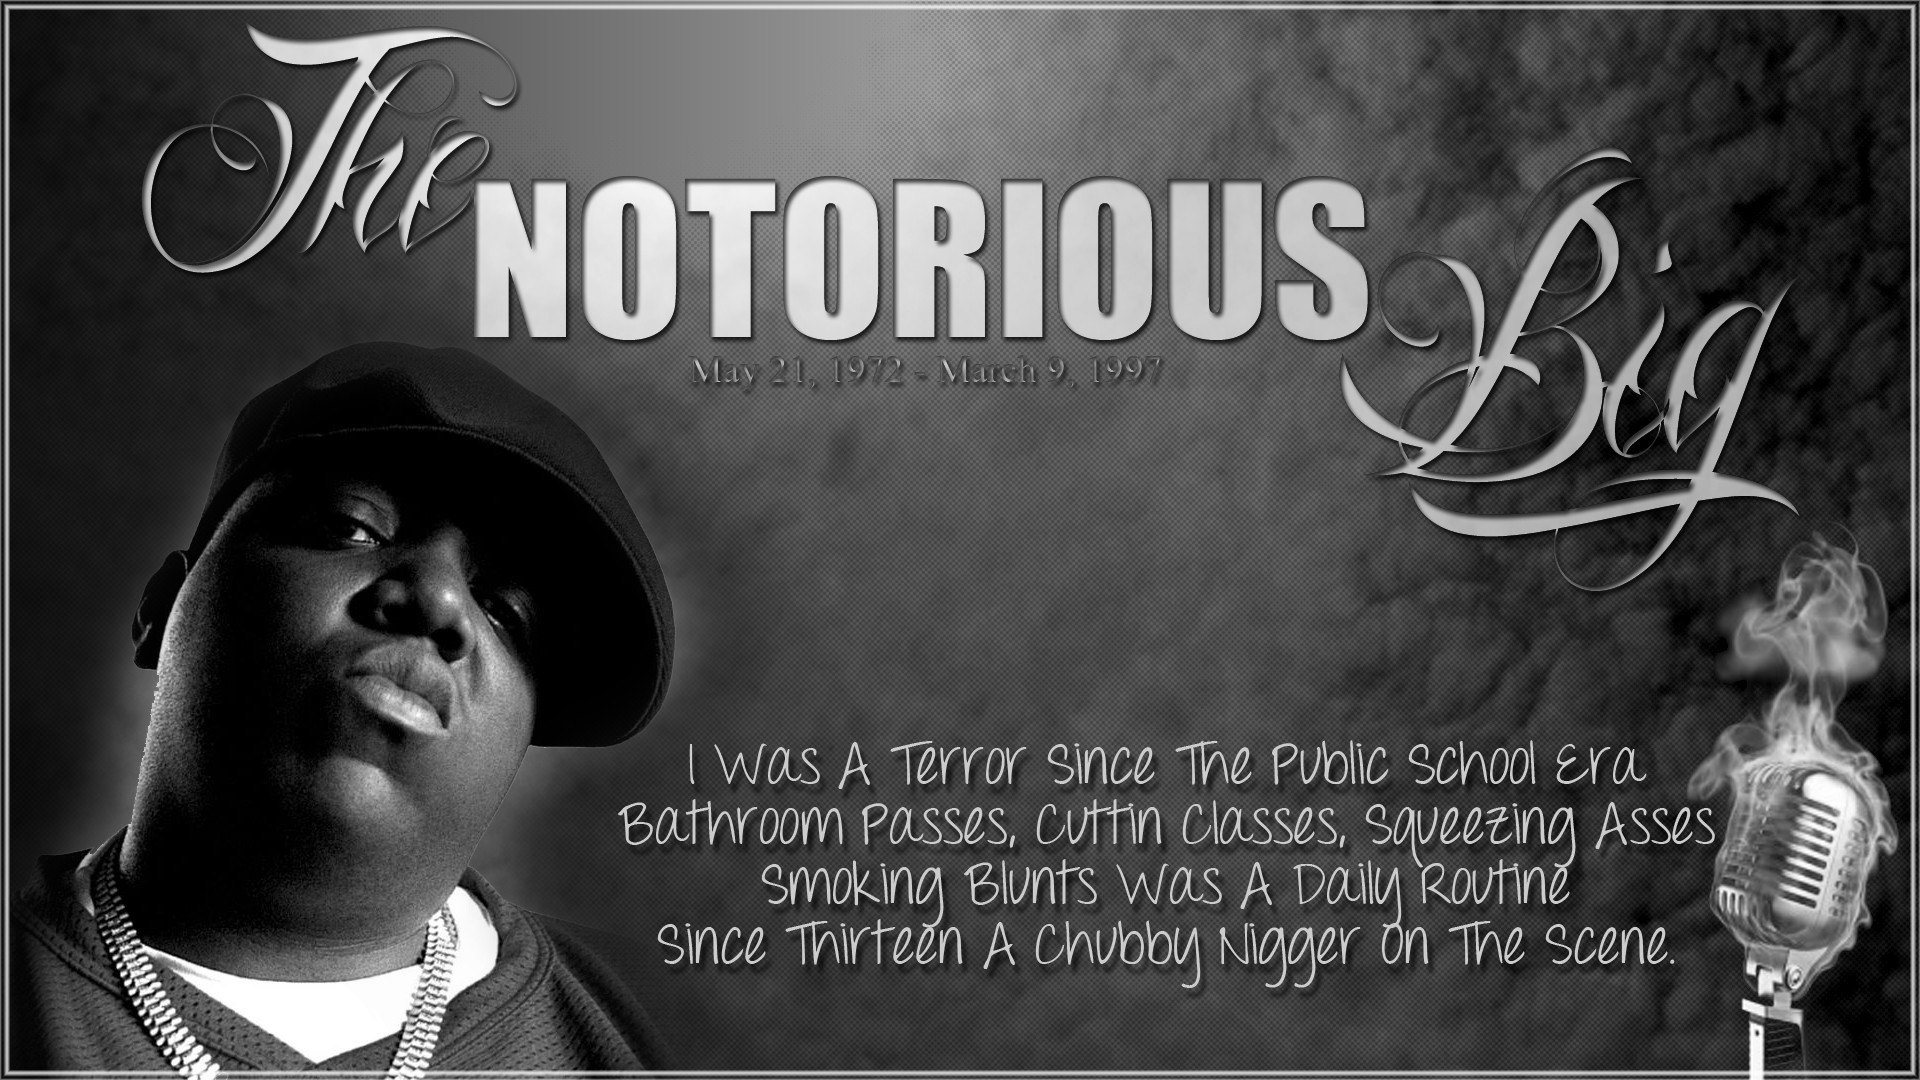 1920x1080 ... The Notorious BIG Wallpaper by Instrou-Morior